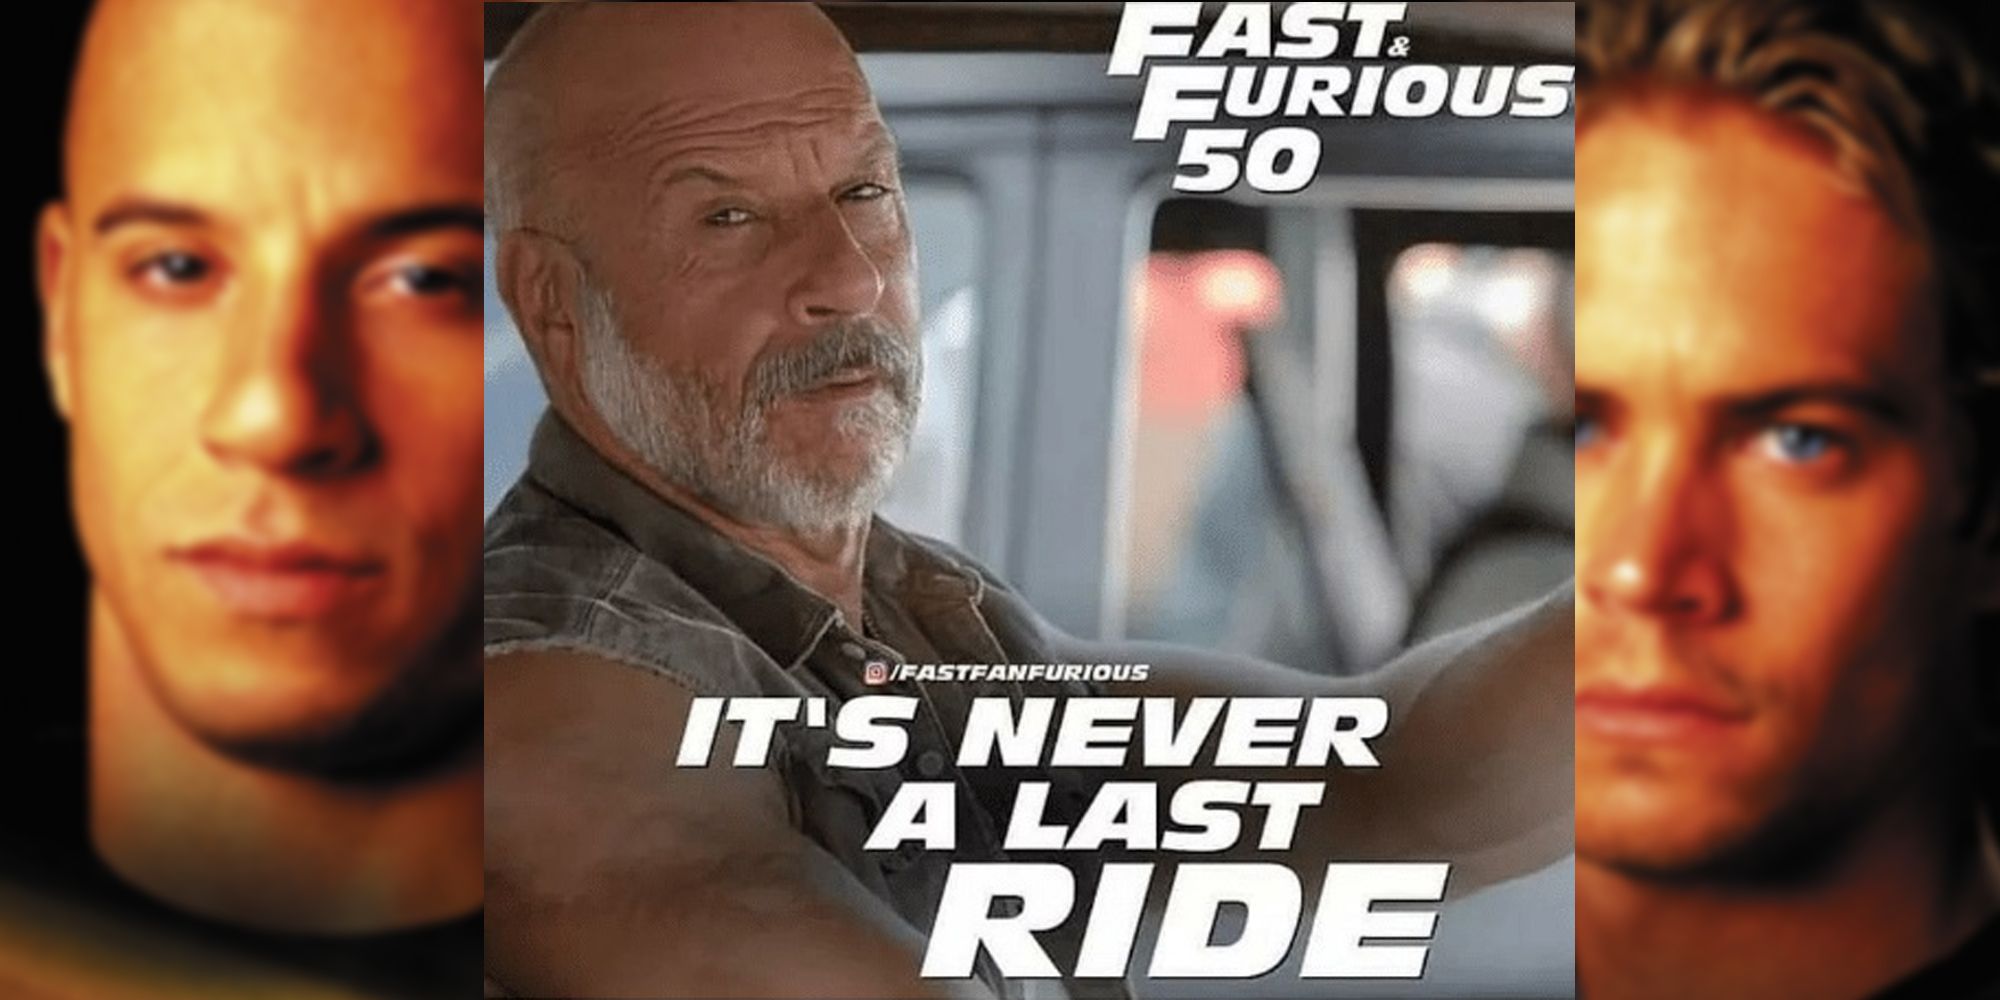 A meme about the fiftieth Fast and Furious meme.